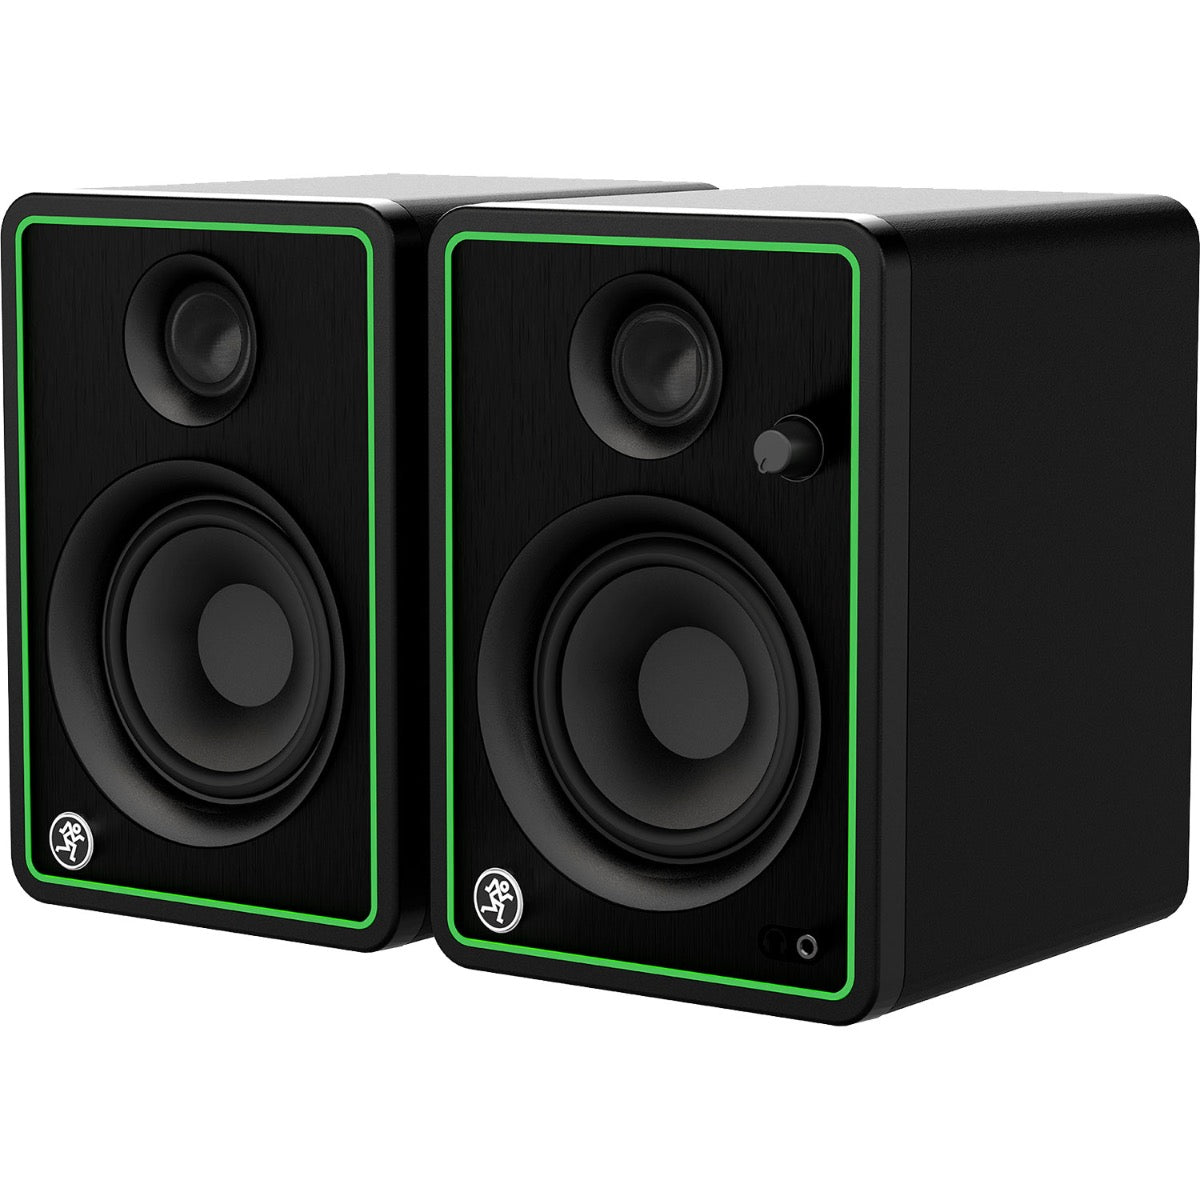 3/4 view of Mackie CR4-XBT 4" Creative Reference Multimedia Monitors w/Bluetooth showing front, right side and top